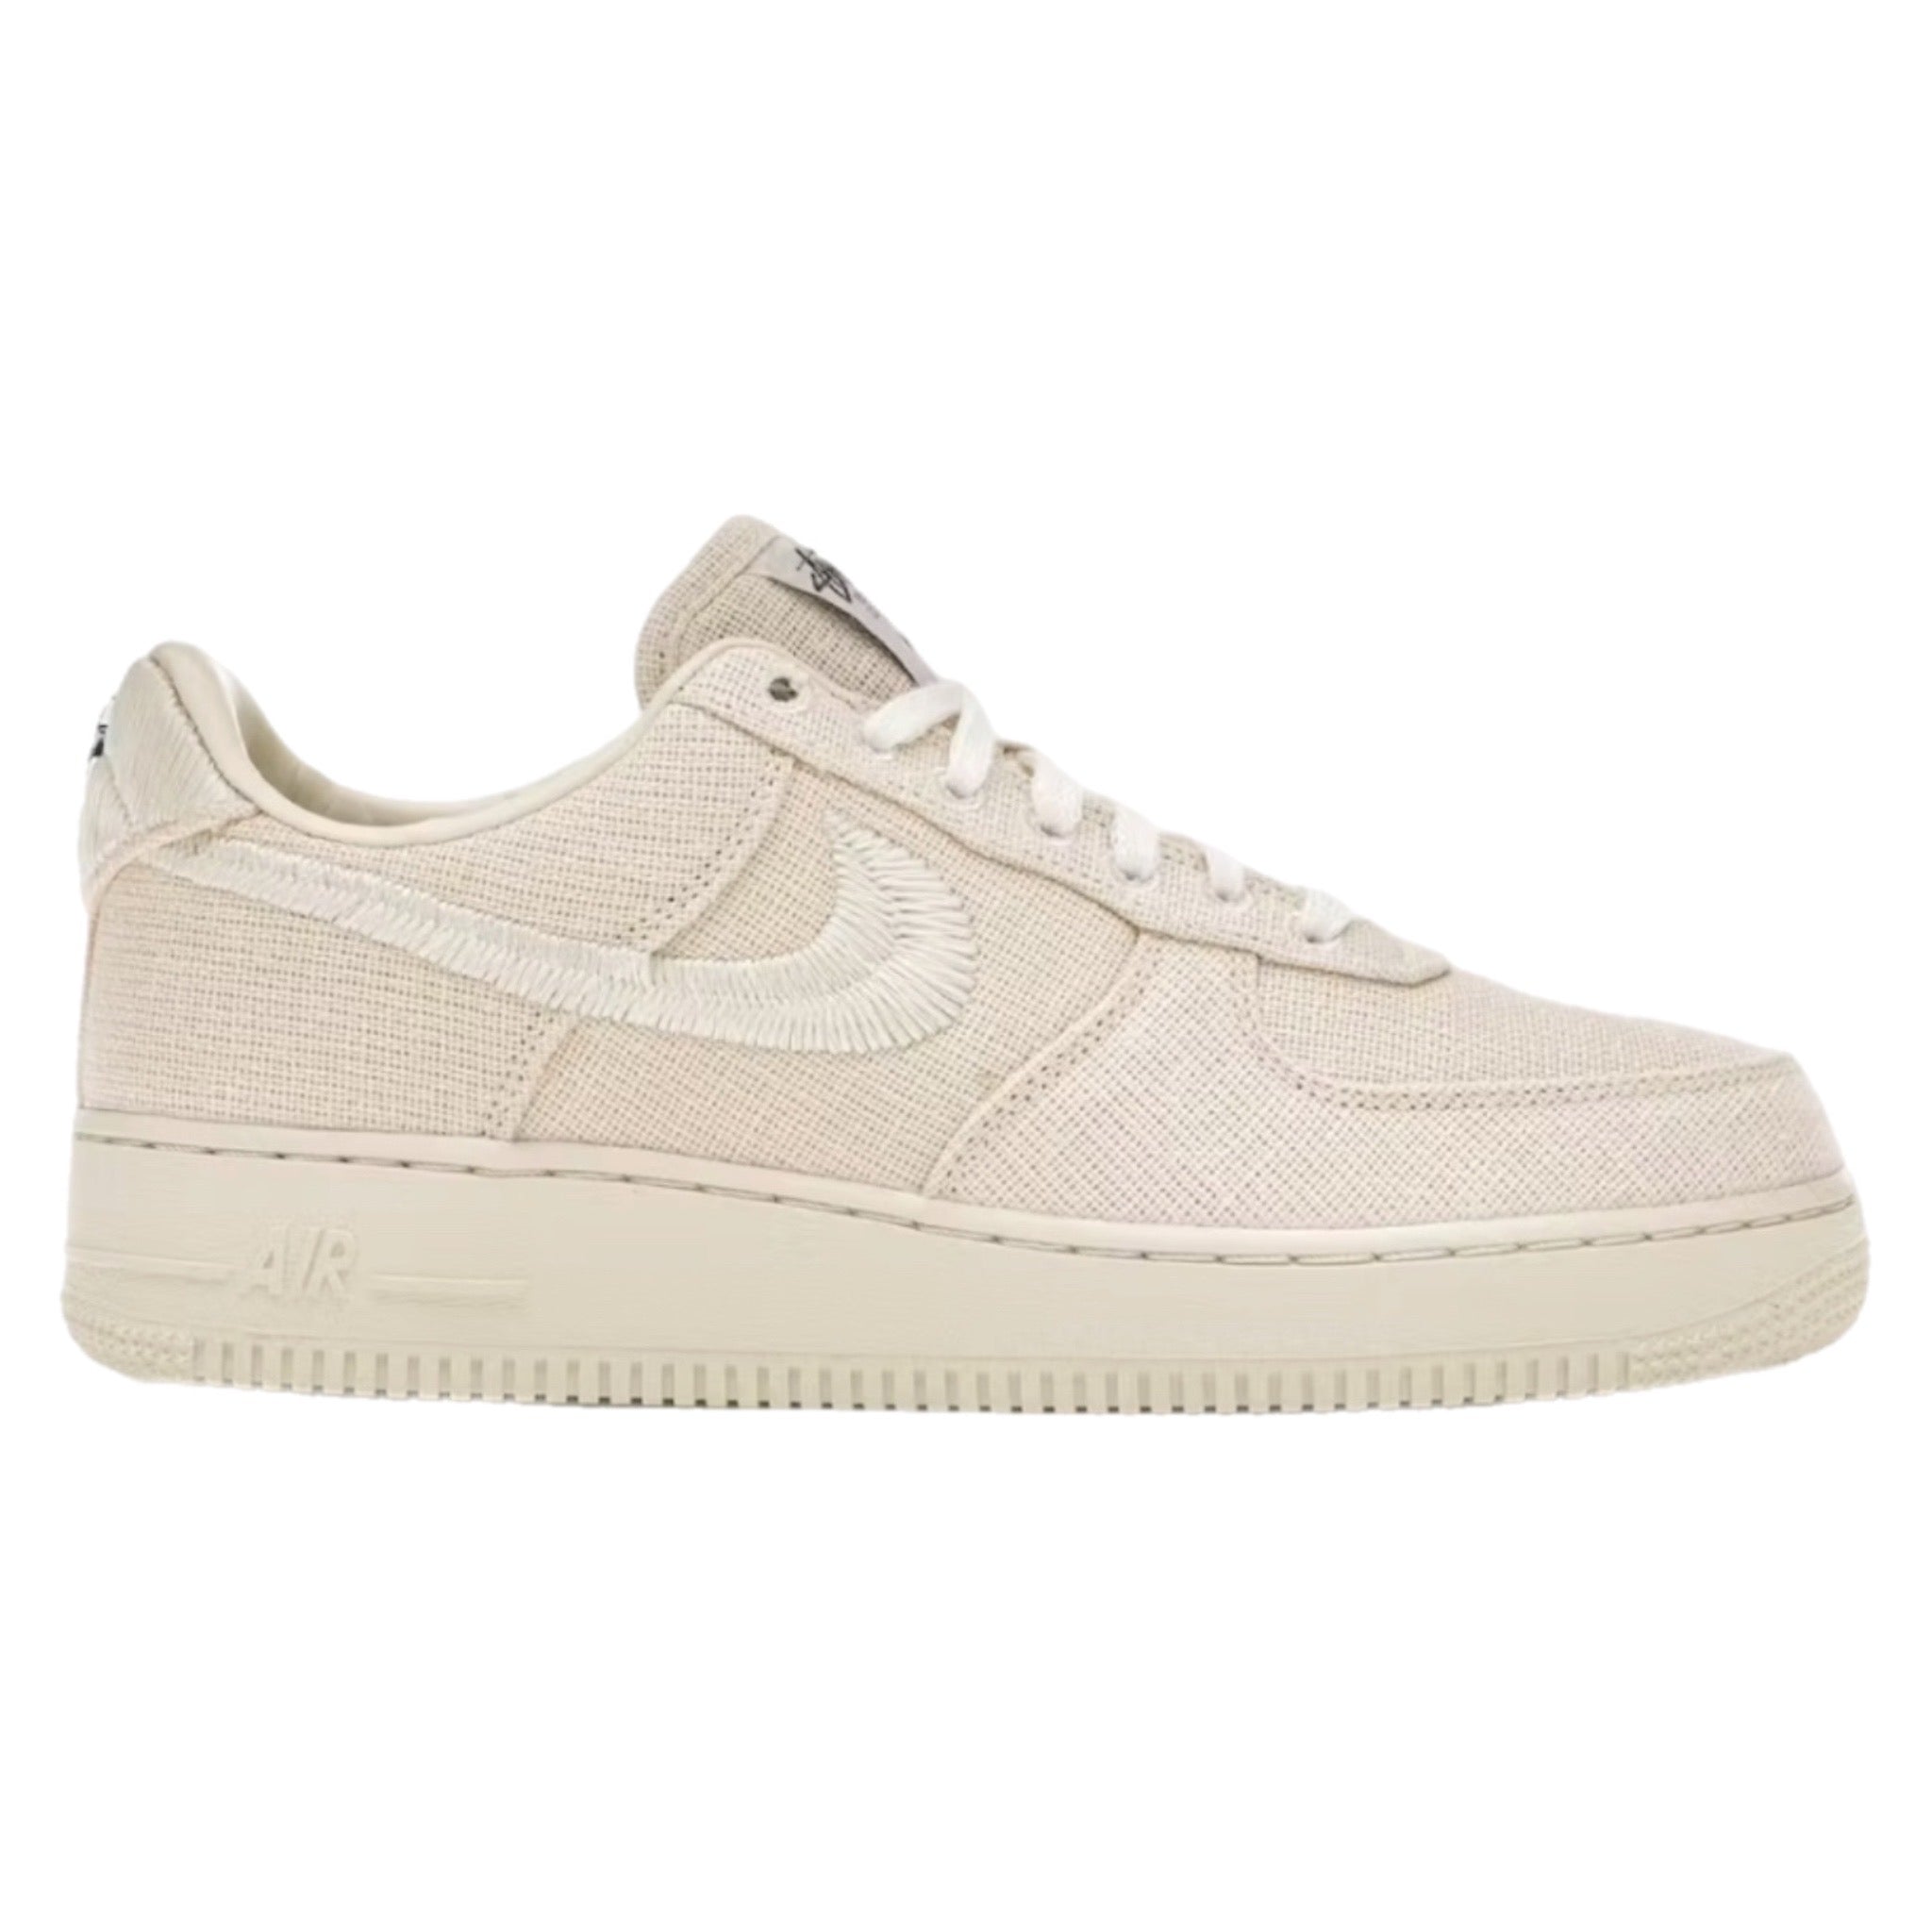 Nike Air Force One x Stussy Fossil (Used)